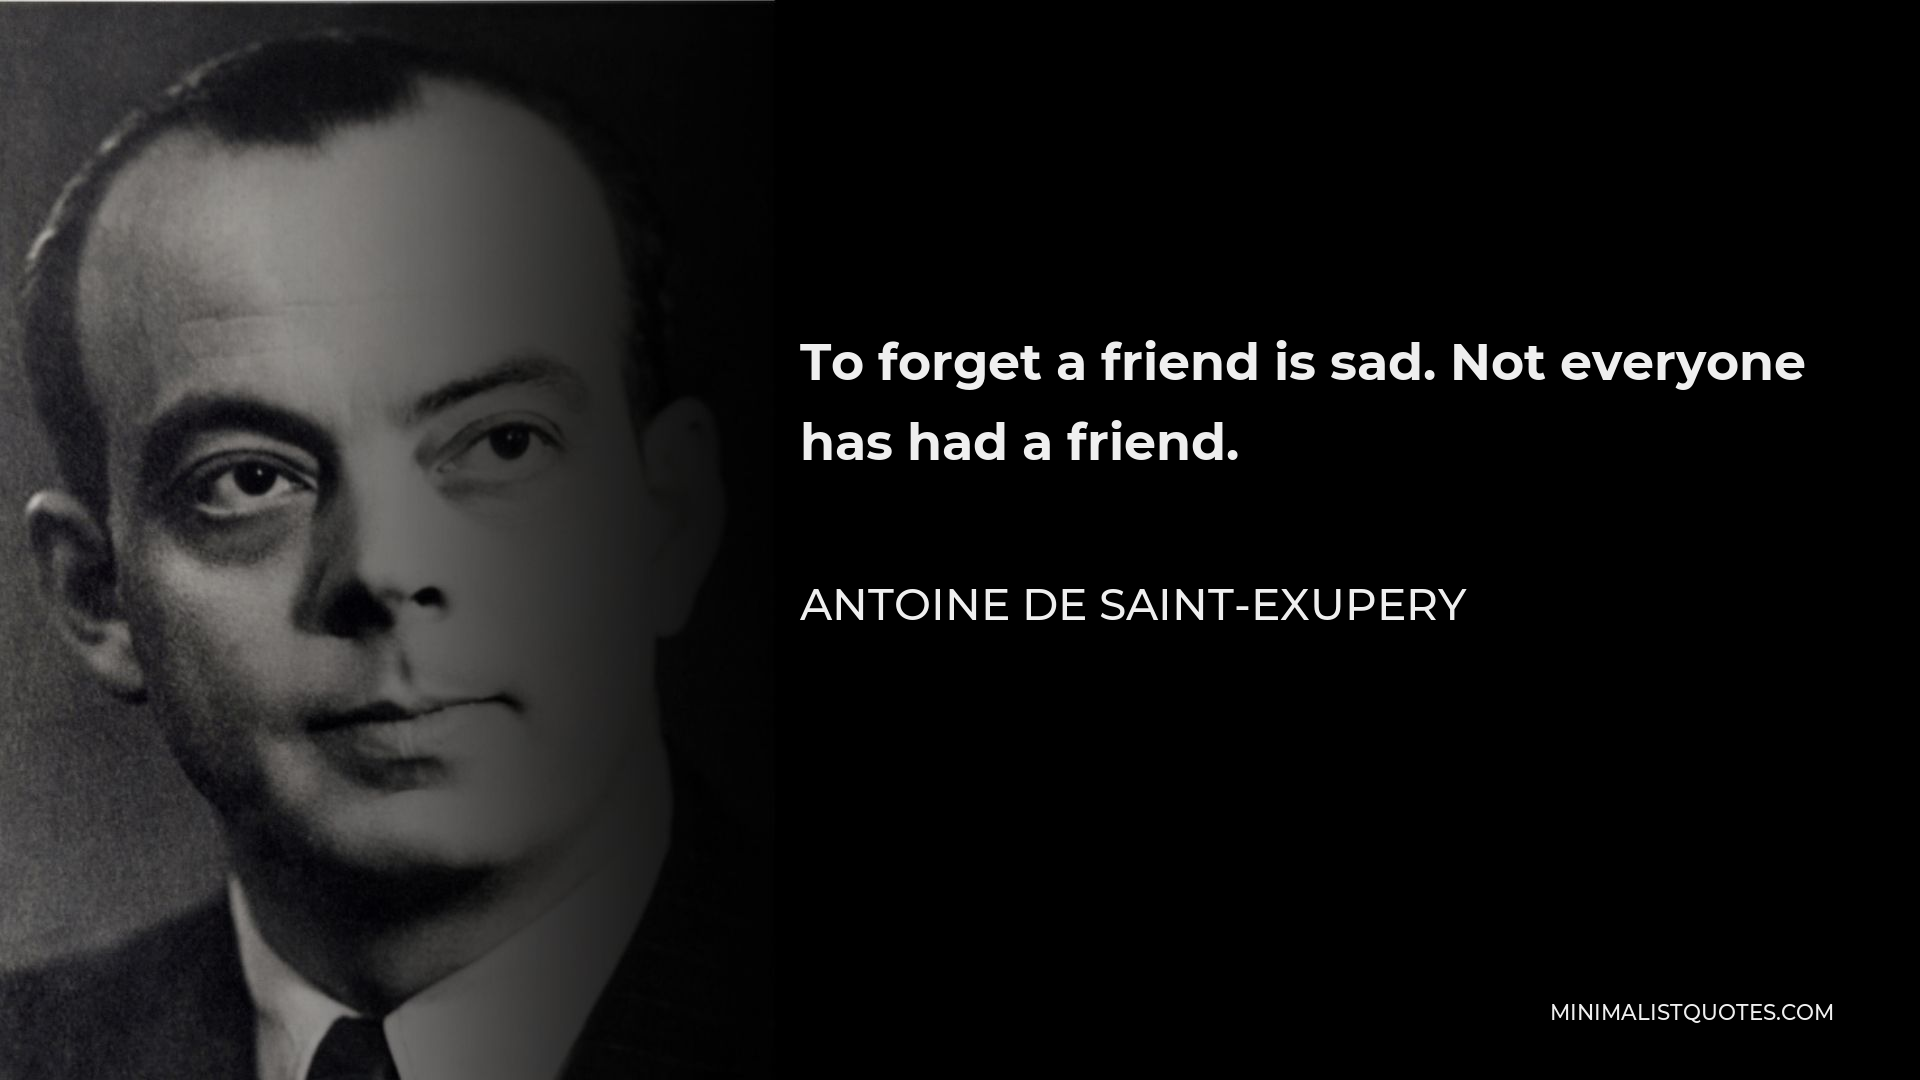 Antoine de Saint-Exupery Quote - To forget a friend is sad. Not everyone has had a friend.